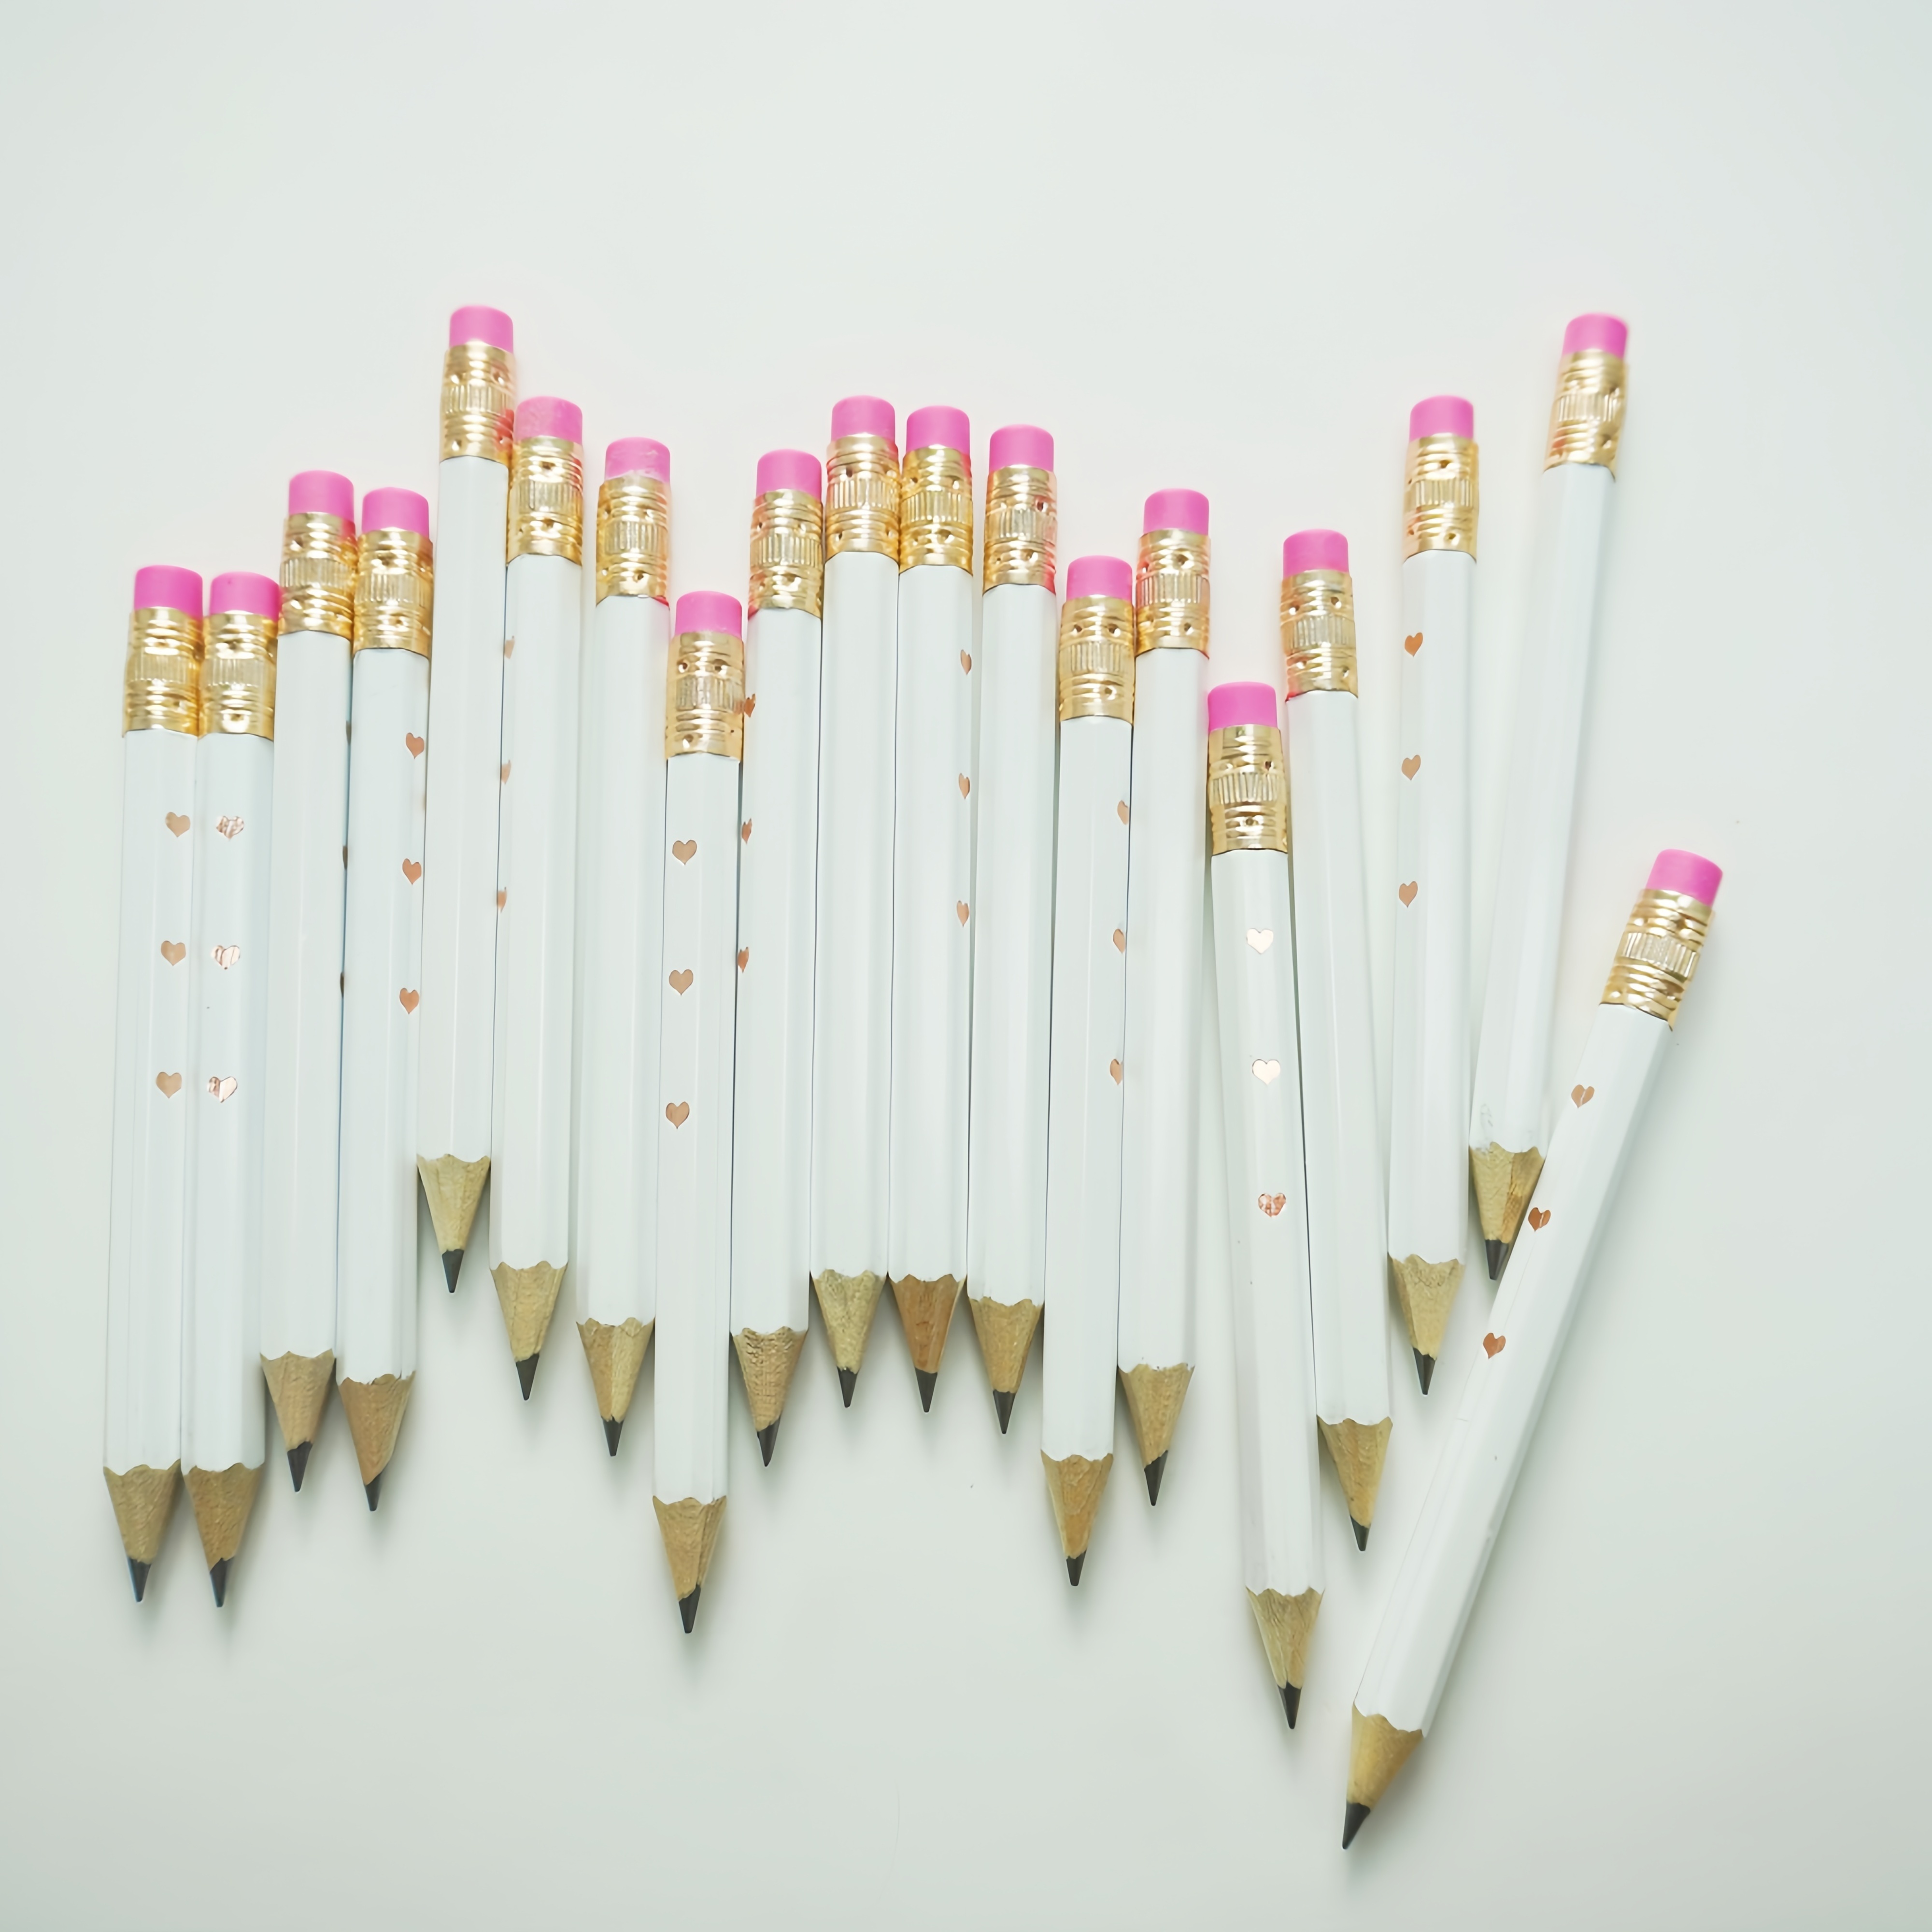 

Elegant Rose Golden Mini Pencils - 20/10 Piece | Perfect For Party Favors, Bridal Showers & Games | White, 2mm Lead, For Ages 14+